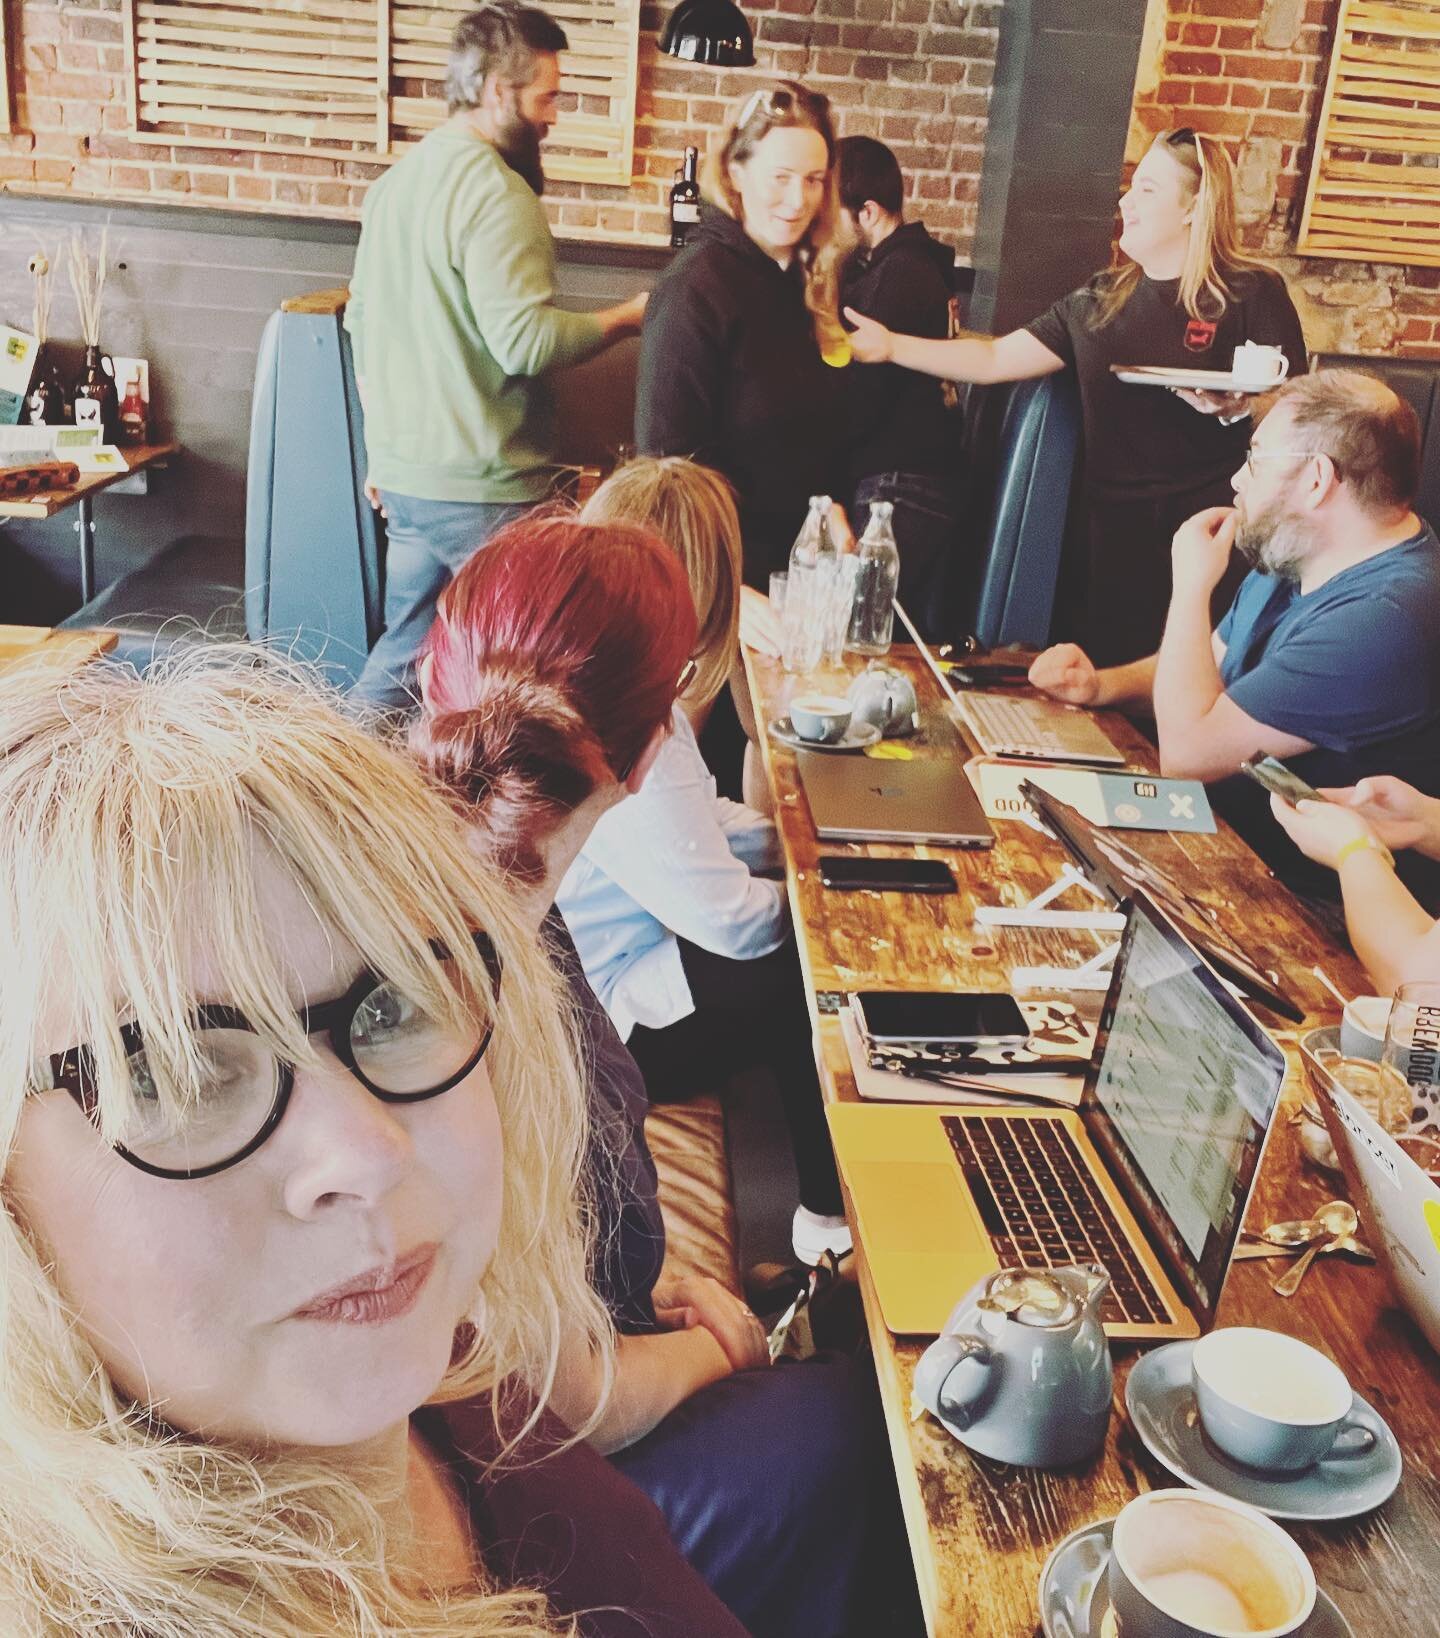 Out and about yesterday. Two networking events with @freelancermag in the morning up the road as coworking came to Cambridge and with Drive the Network in the afternoon. Amazing to see lovely people and talk about the highs and lows of life both at w